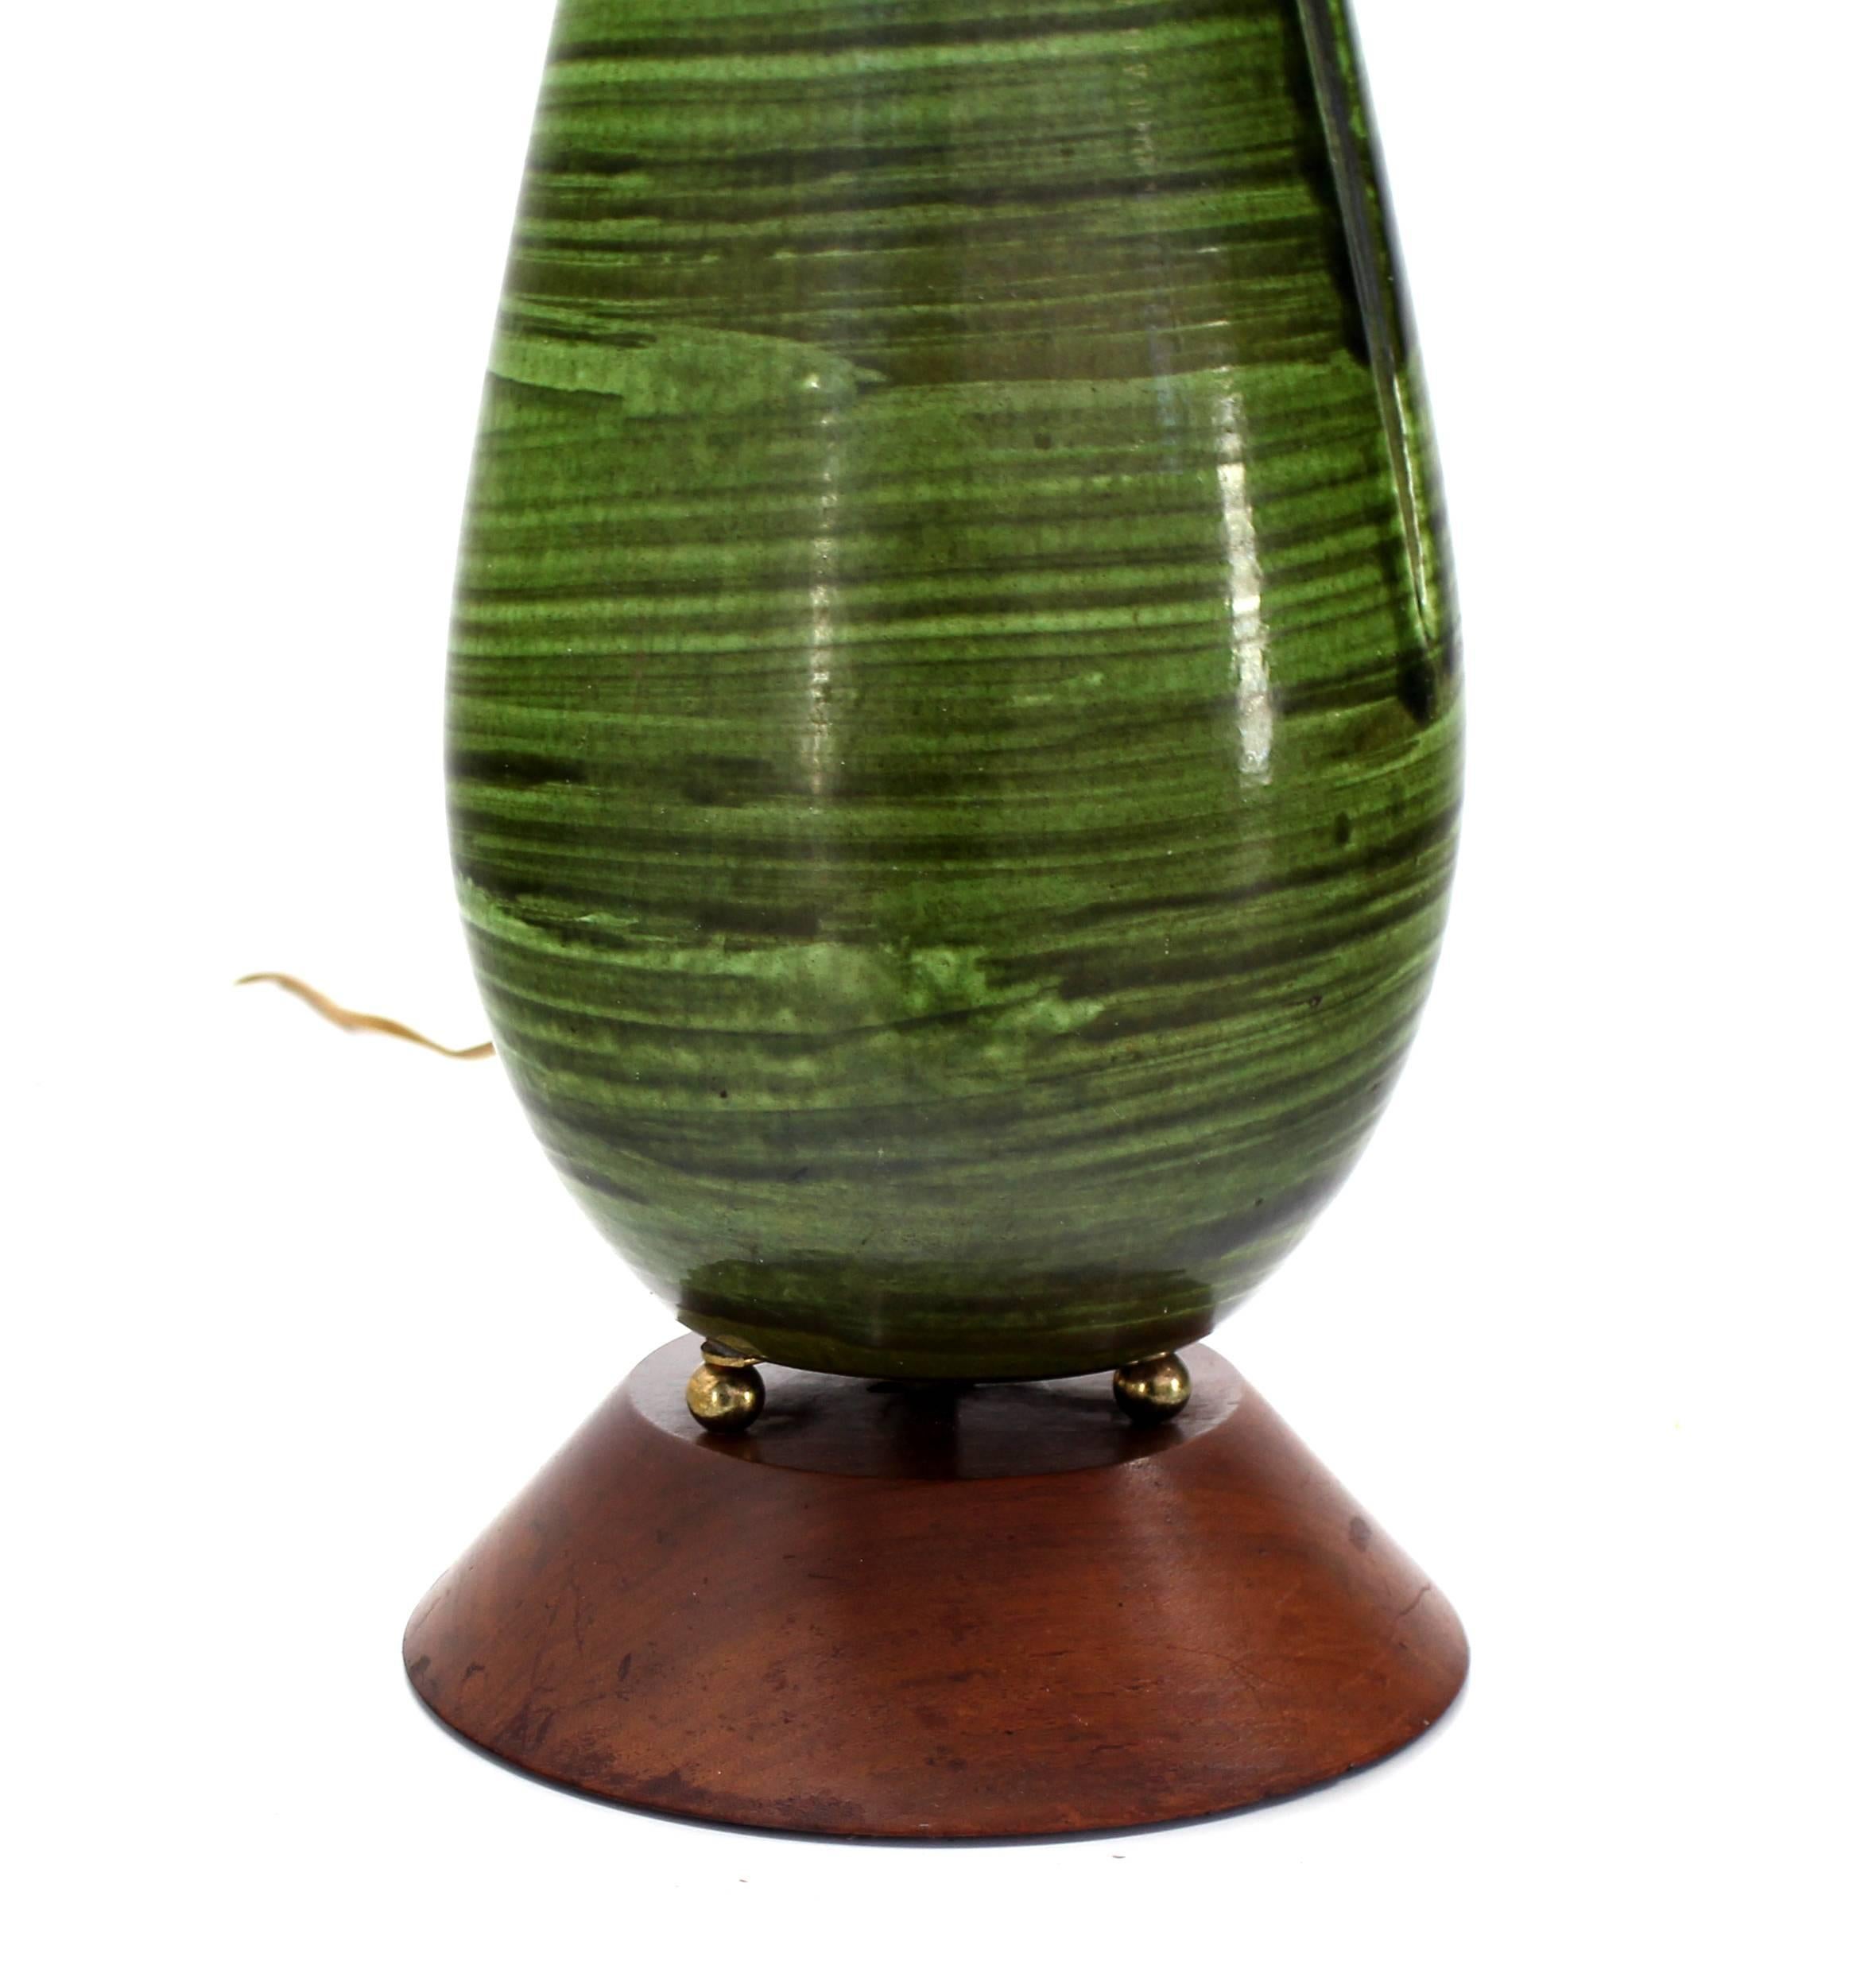 Art Pottery Tall Vase Shape Table Lamp In Excellent Condition For Sale In Rockaway, NJ